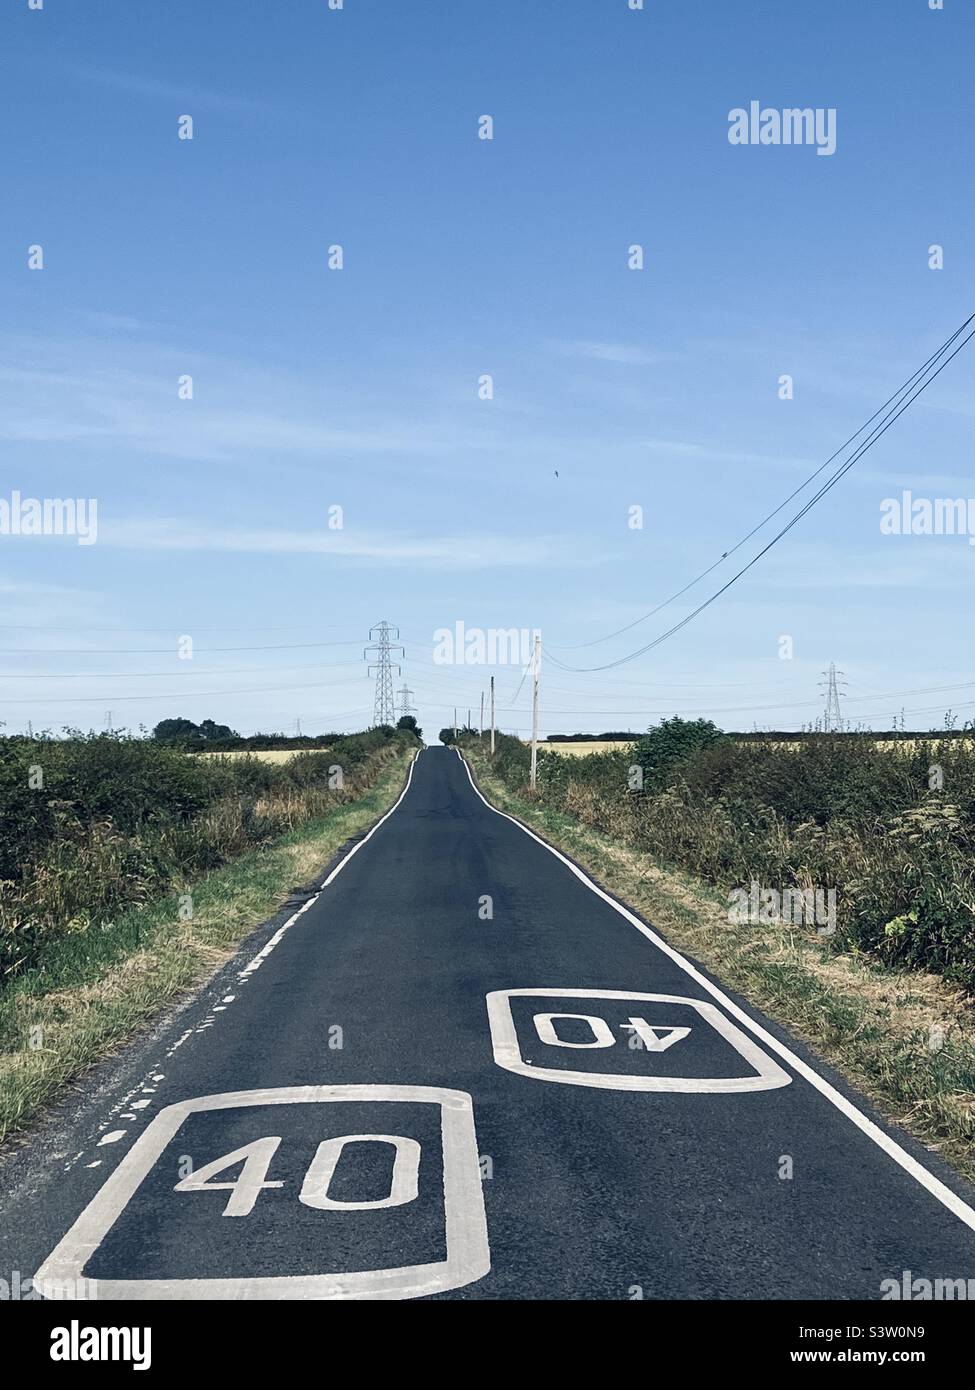 Diminishing perspective on an empty road Stock Photo